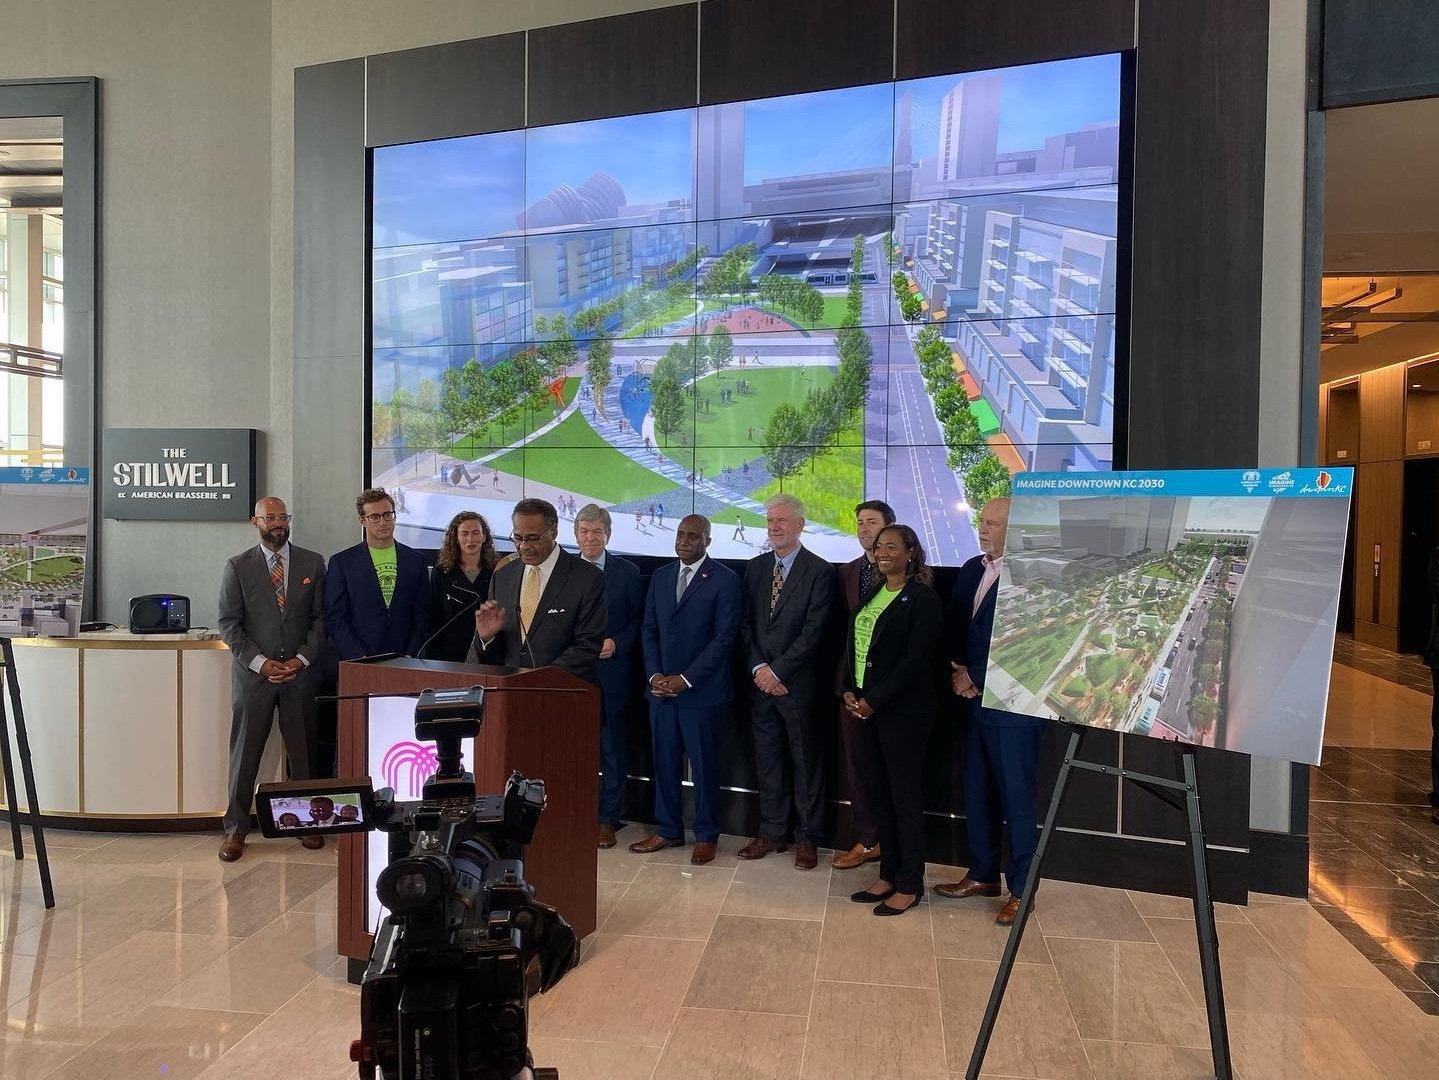 Unveiled the 670 South Loop Link park plans